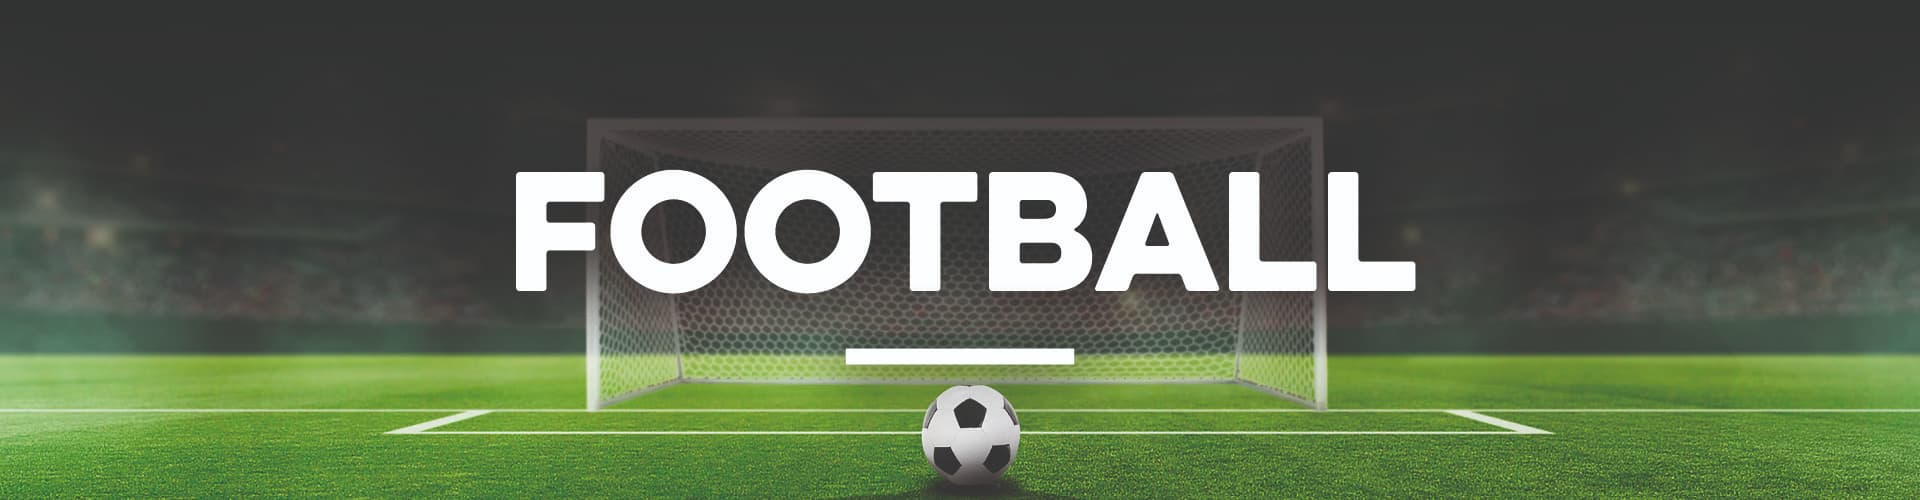 Watch Live Football in Birmingham at The Tennis Court Pub